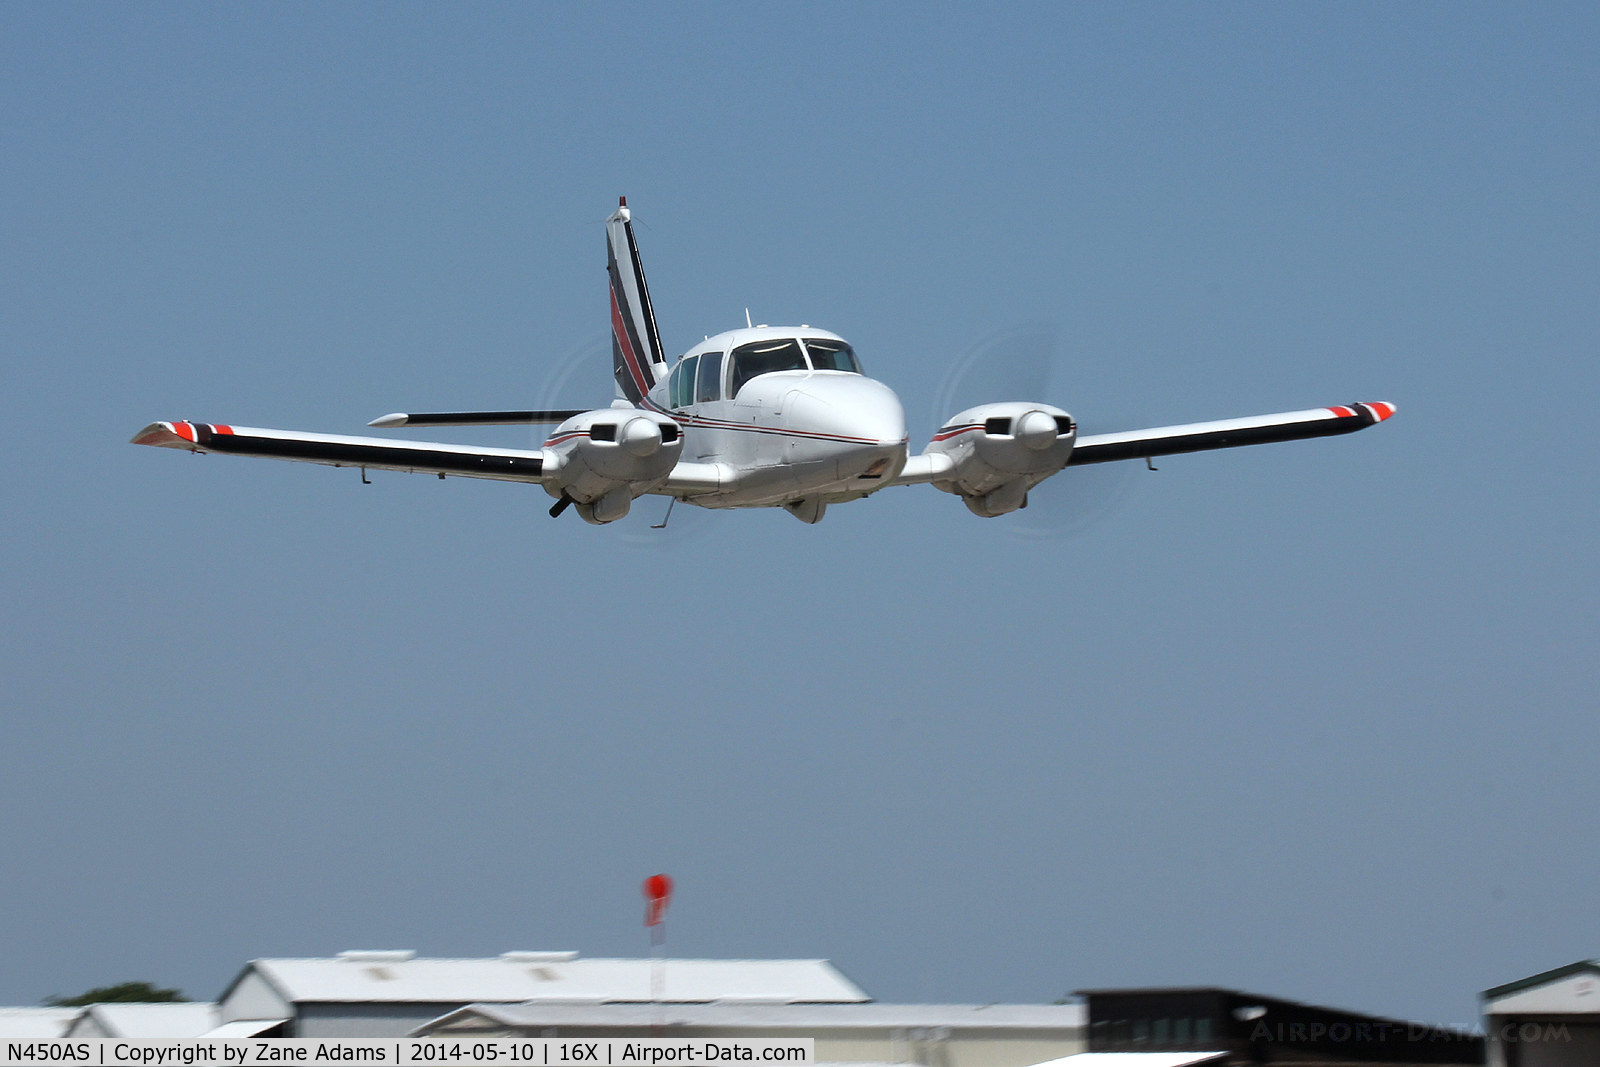 N450AS, 1978 Piper PA-23-250 C/N 27-7854123, At the 2014 Propwash Party